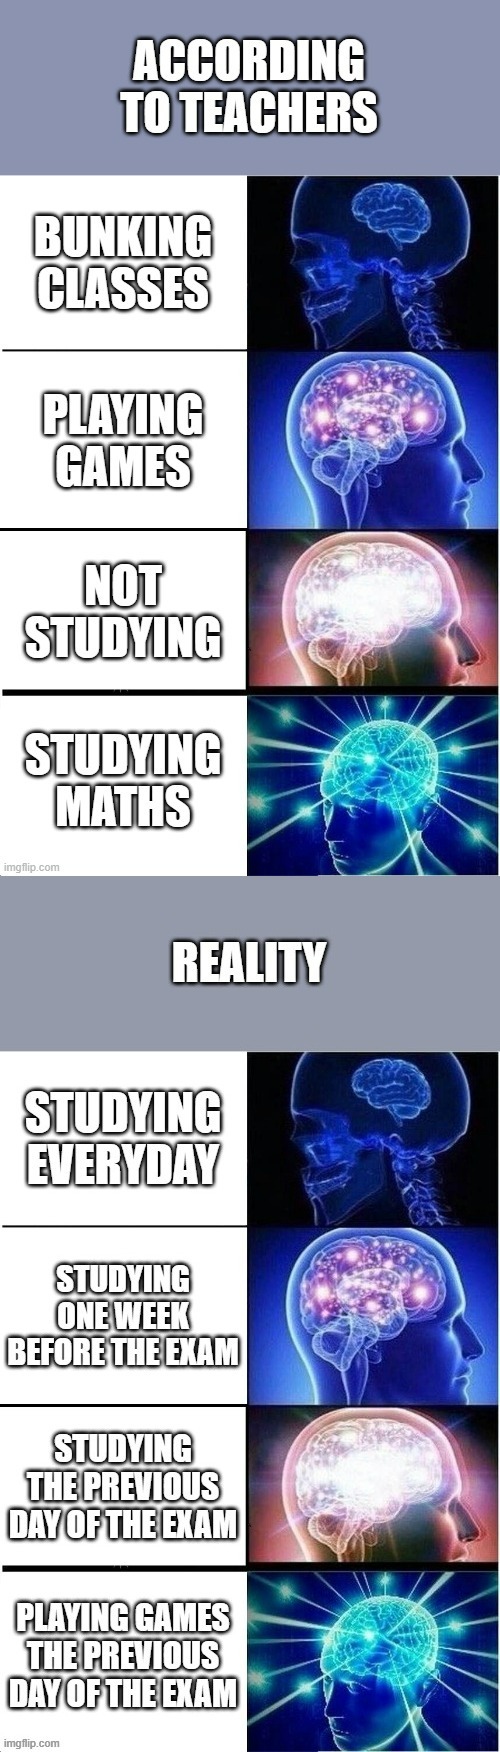 Teacher's Expectation VS Reality | image tagged in expanding brain | made w/ Imgflip meme maker